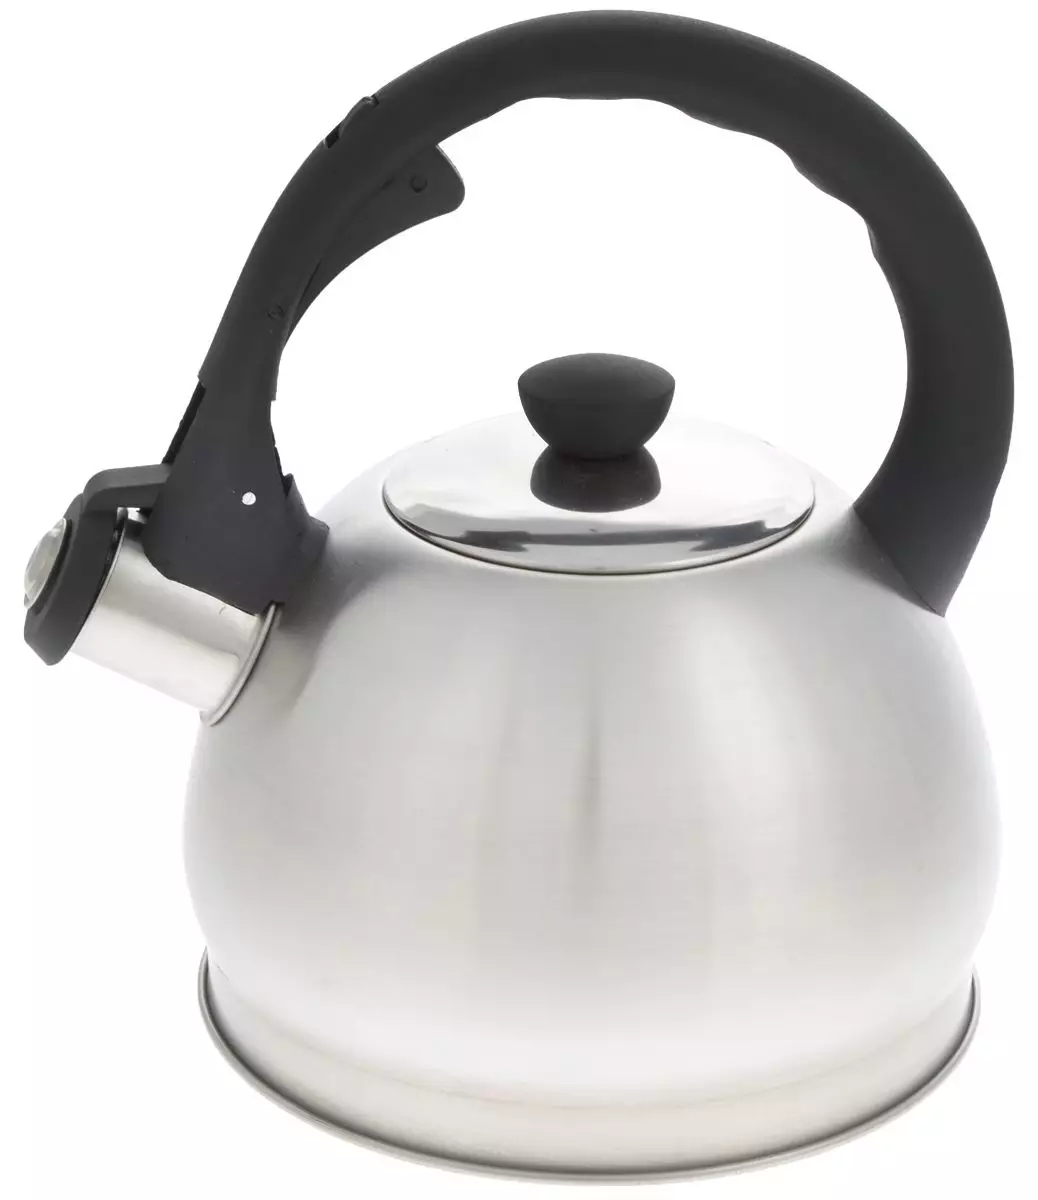 Kettle with a whistle (39 photos): enameled metal and other models for gas and other plates. Rating of the best German, Russian and other manufacturers 10767_16